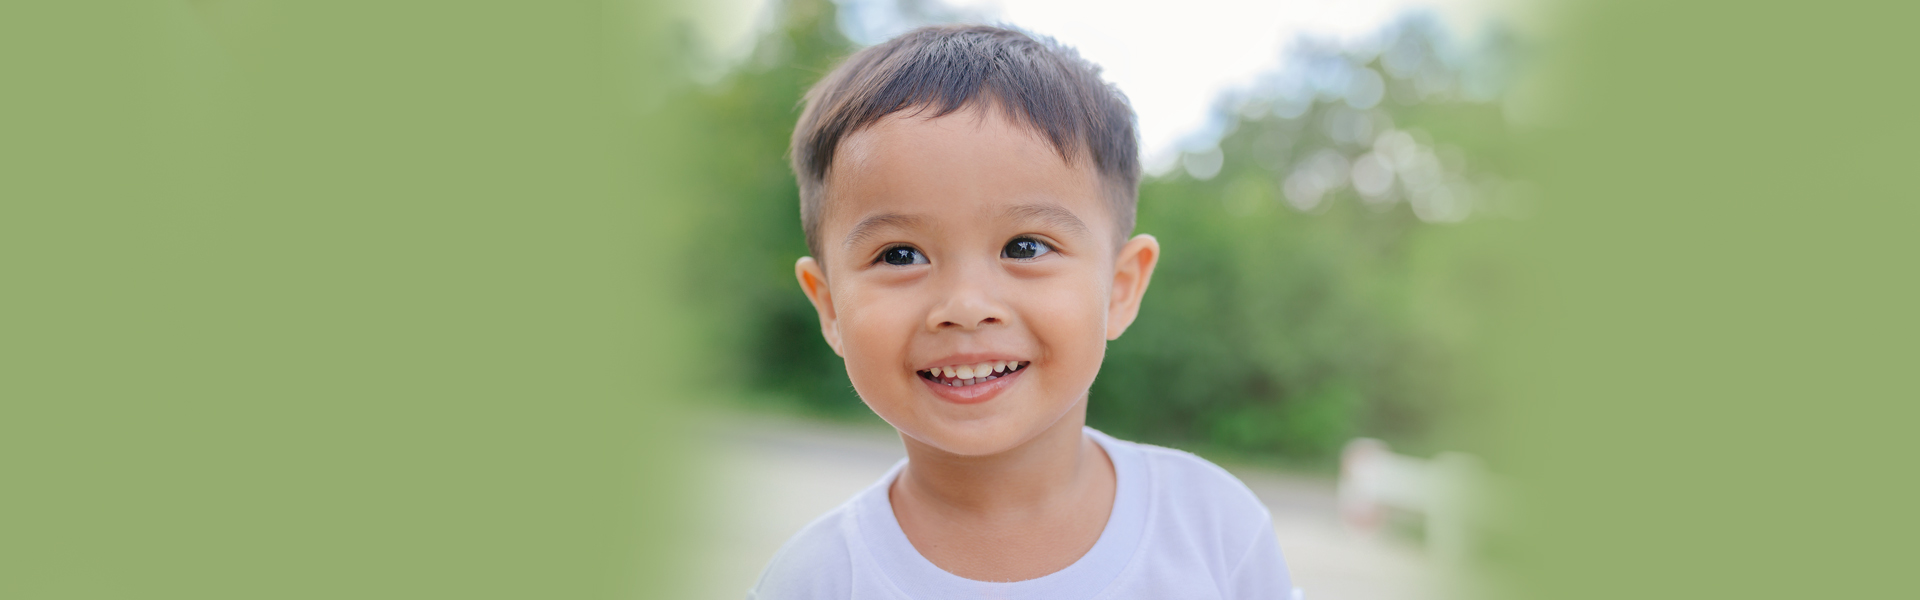 How Long Should a Child See a Pediatric Dentist?